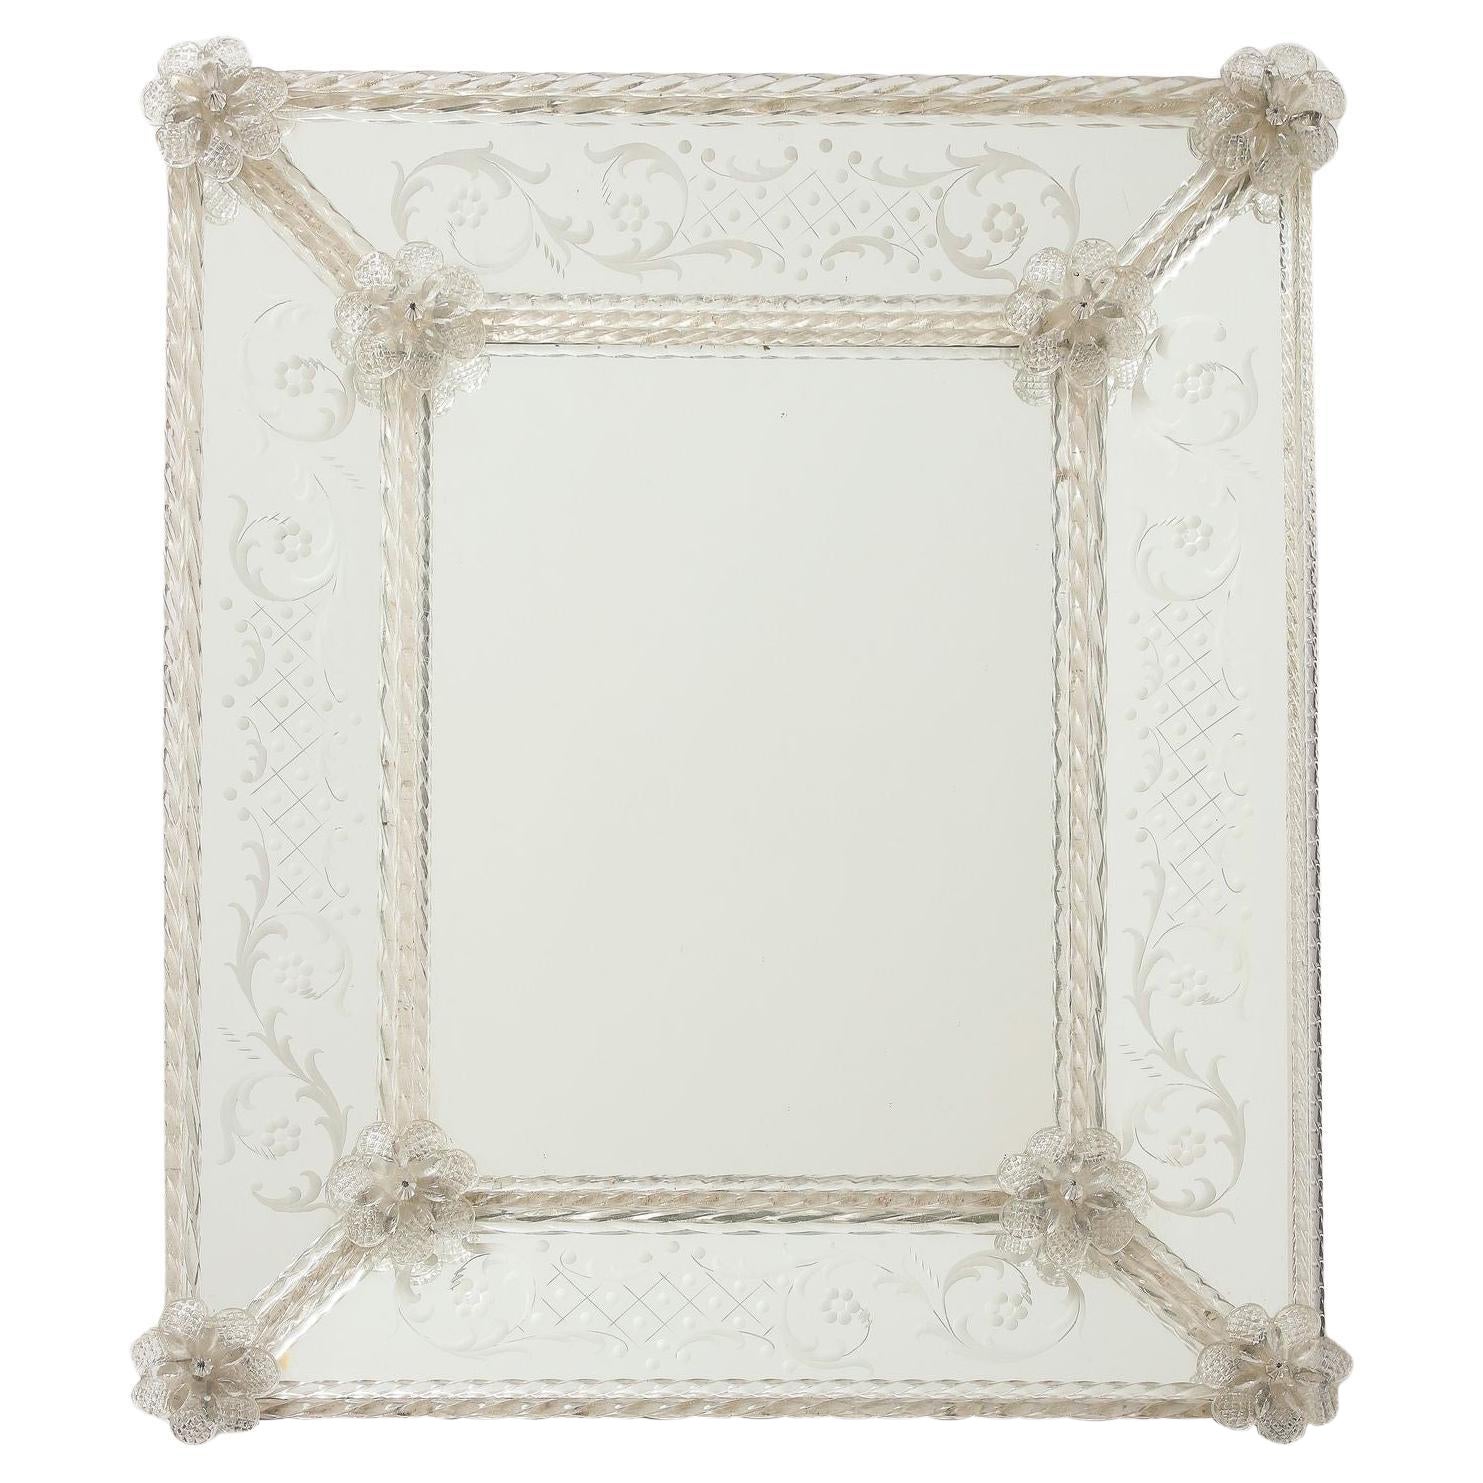 A wonderful Veronese French Mirror with Etching, Rope Twisted Frame and Floretes
